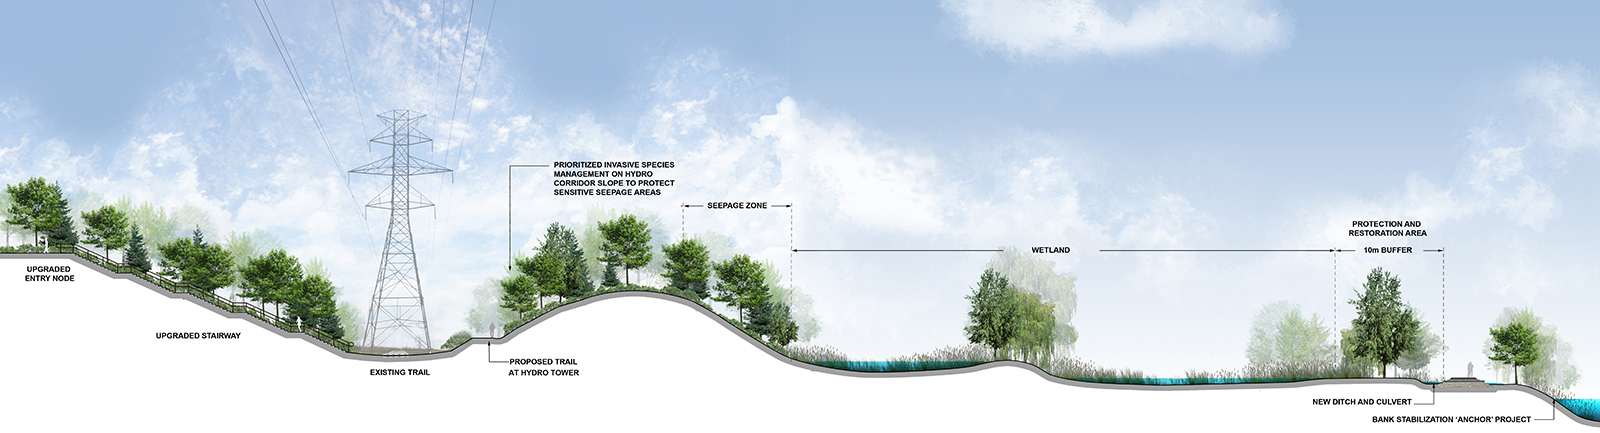 A cross-section of the Hydro Trail Improvements and Wetland Protections area, done as an illustration, that has specific sections labelled. More description is available following the image. 